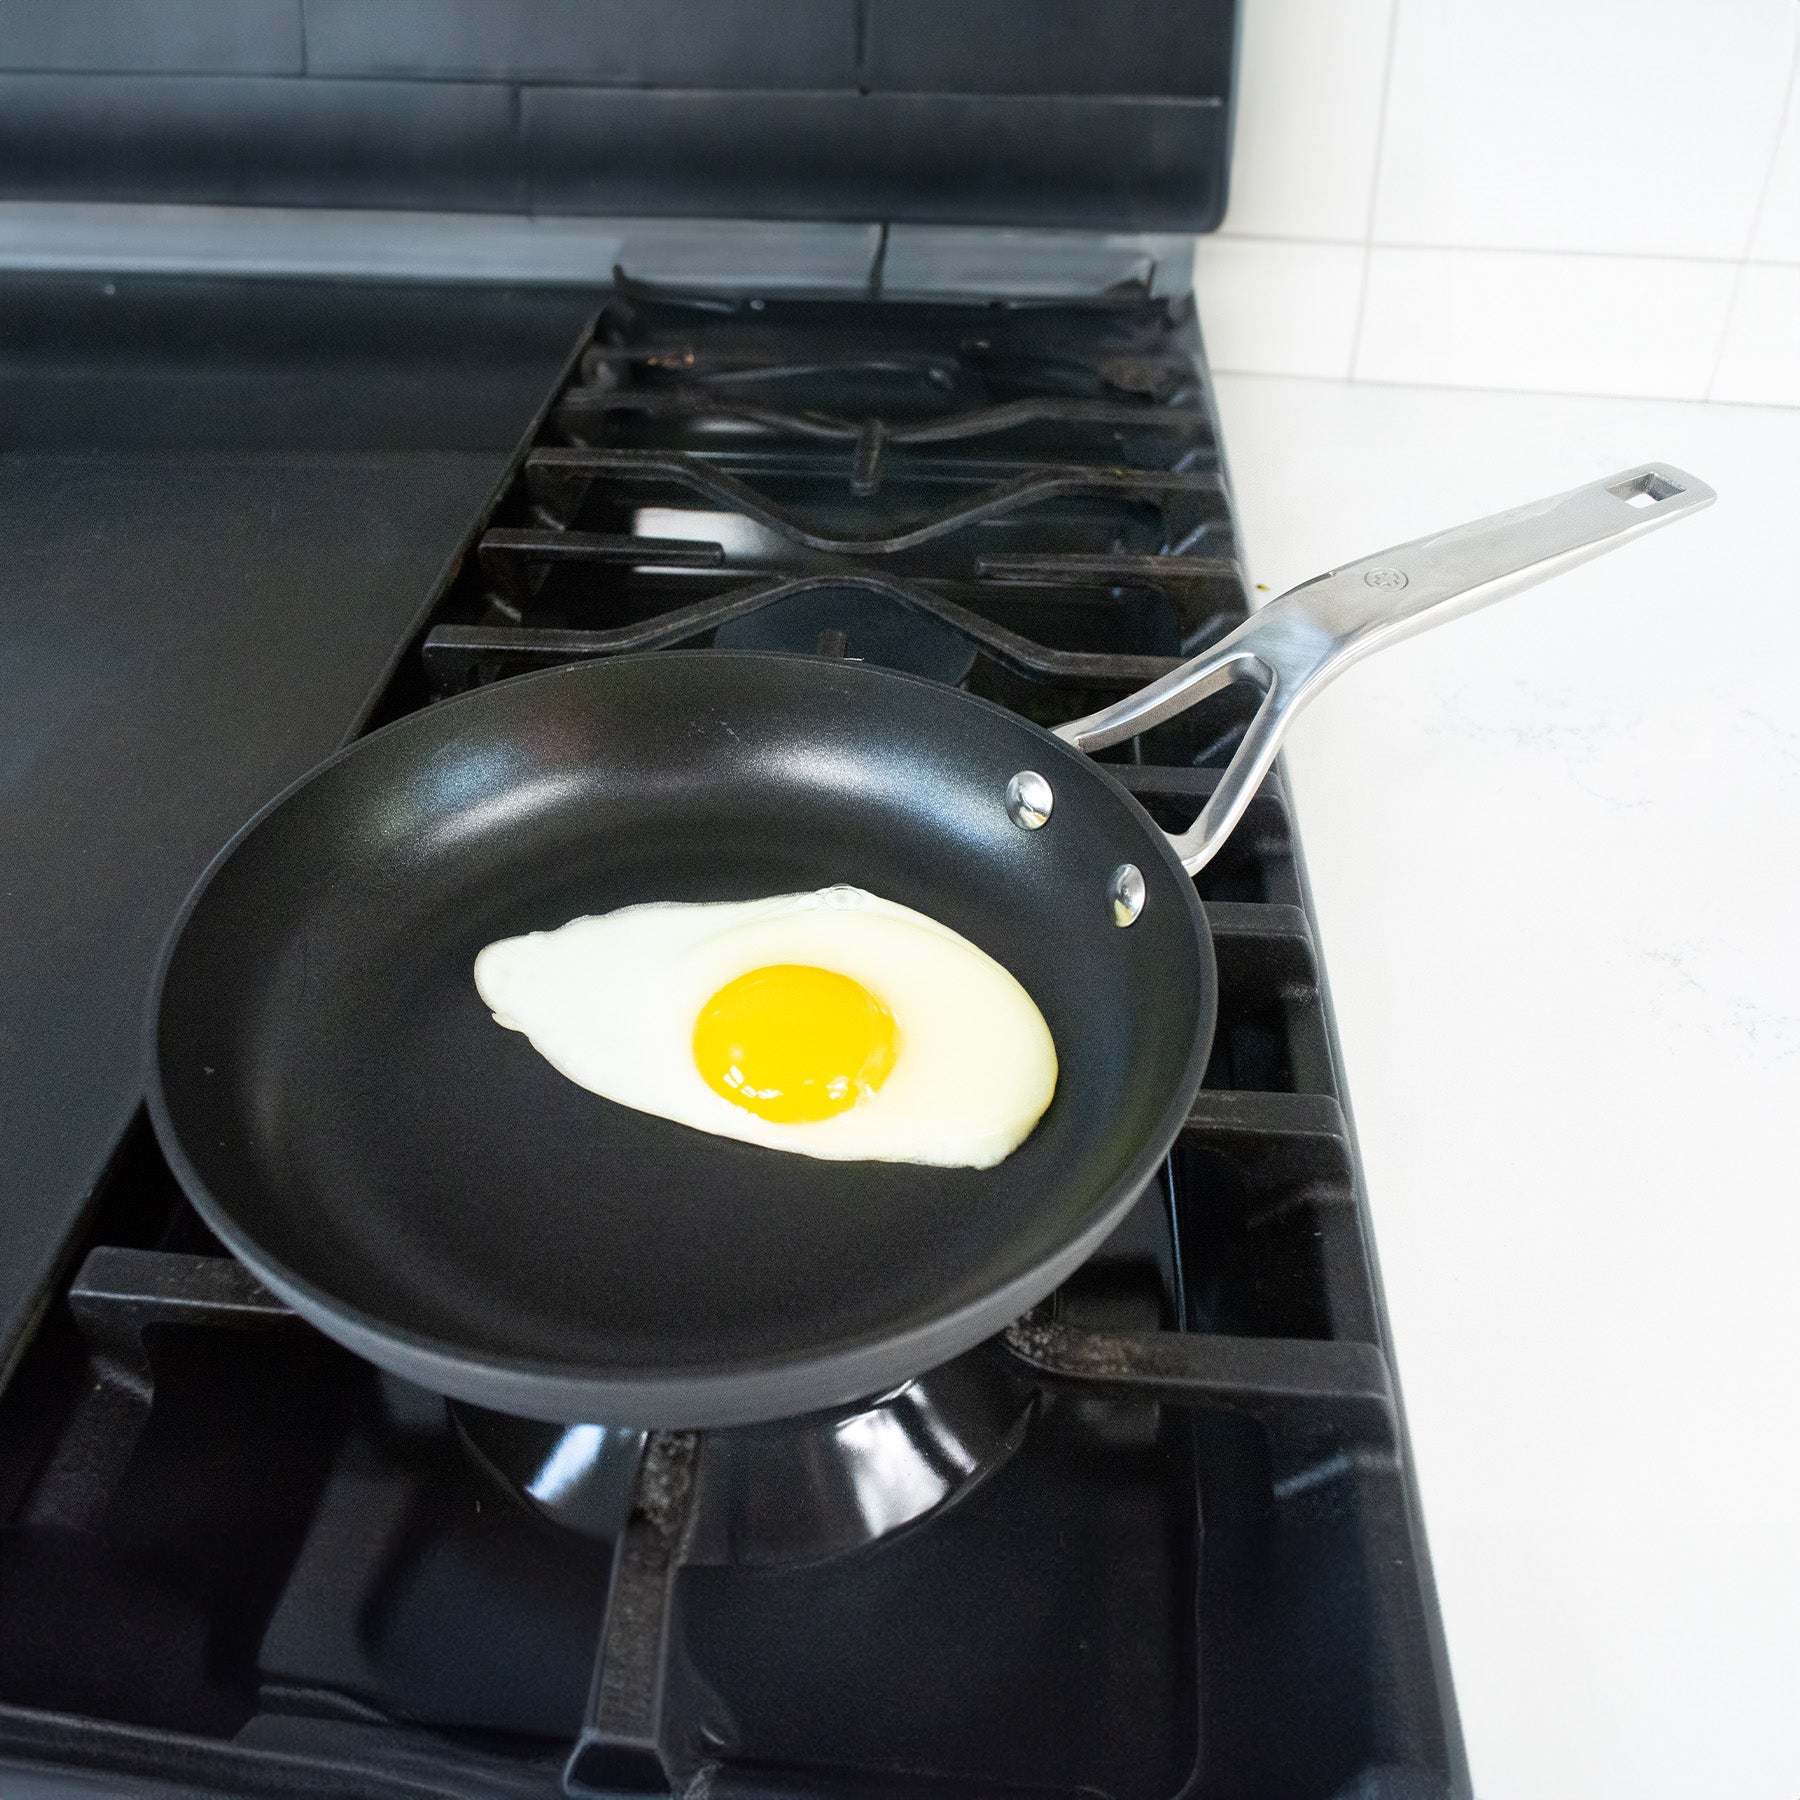 Hard Anodised Nonstick Fry Pan in use on stove top